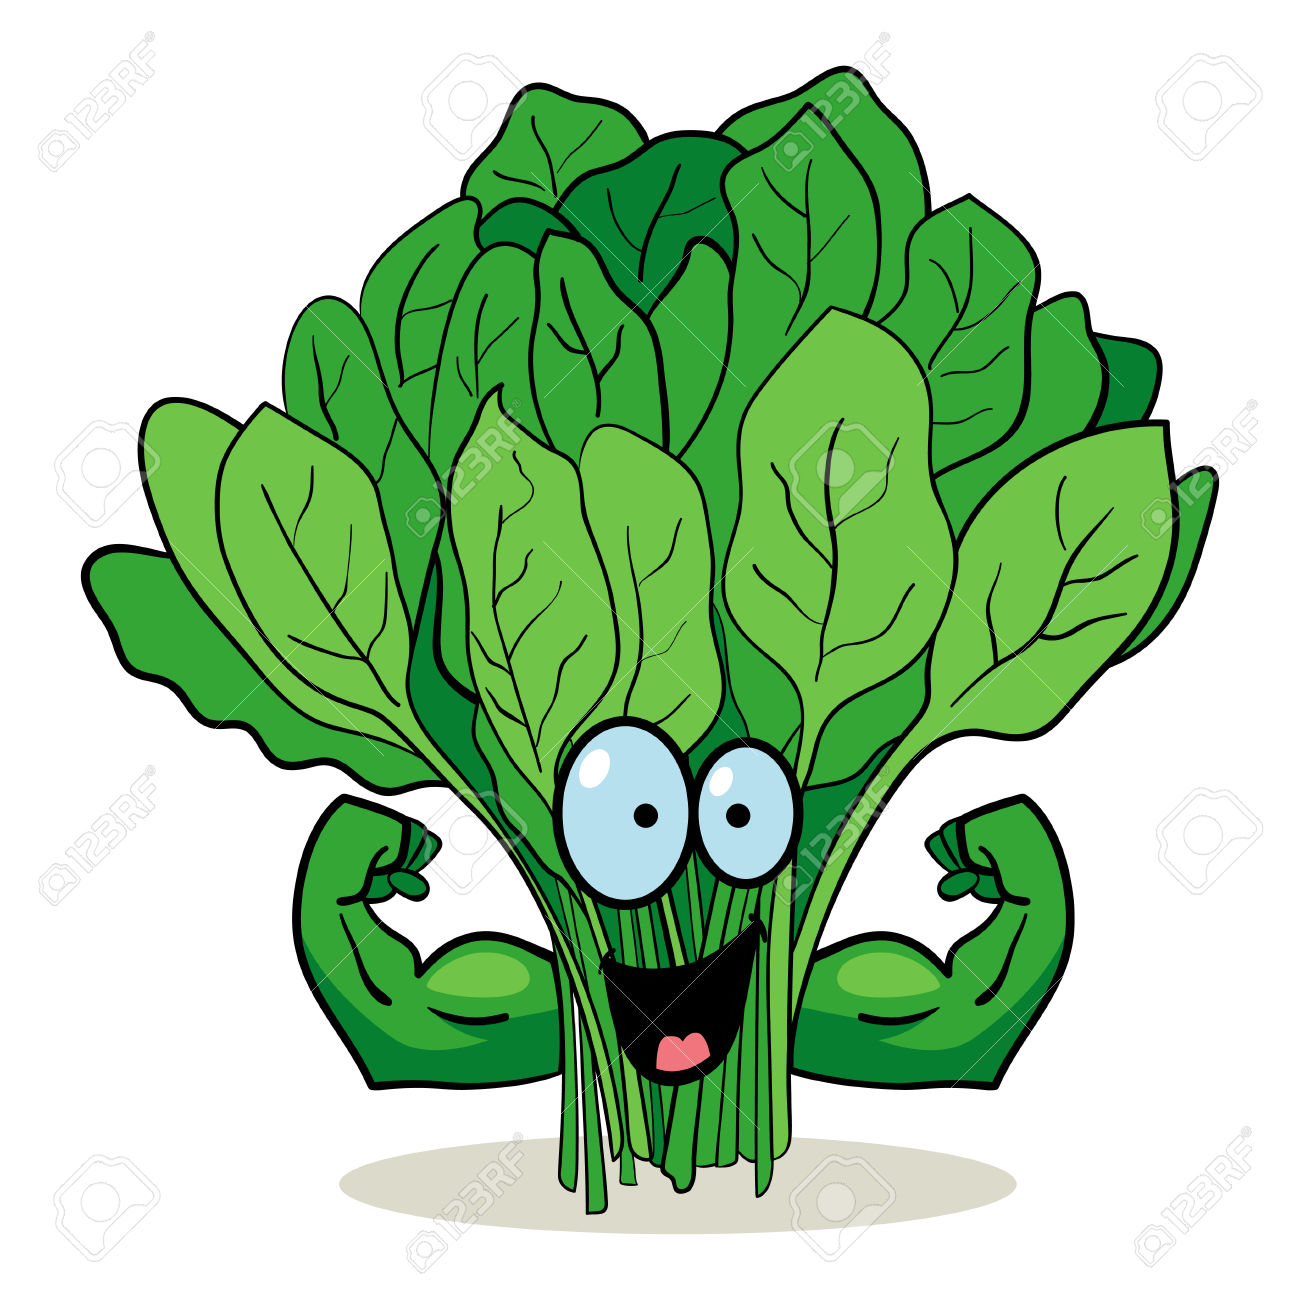 Spinach clipart #15, Download drawings